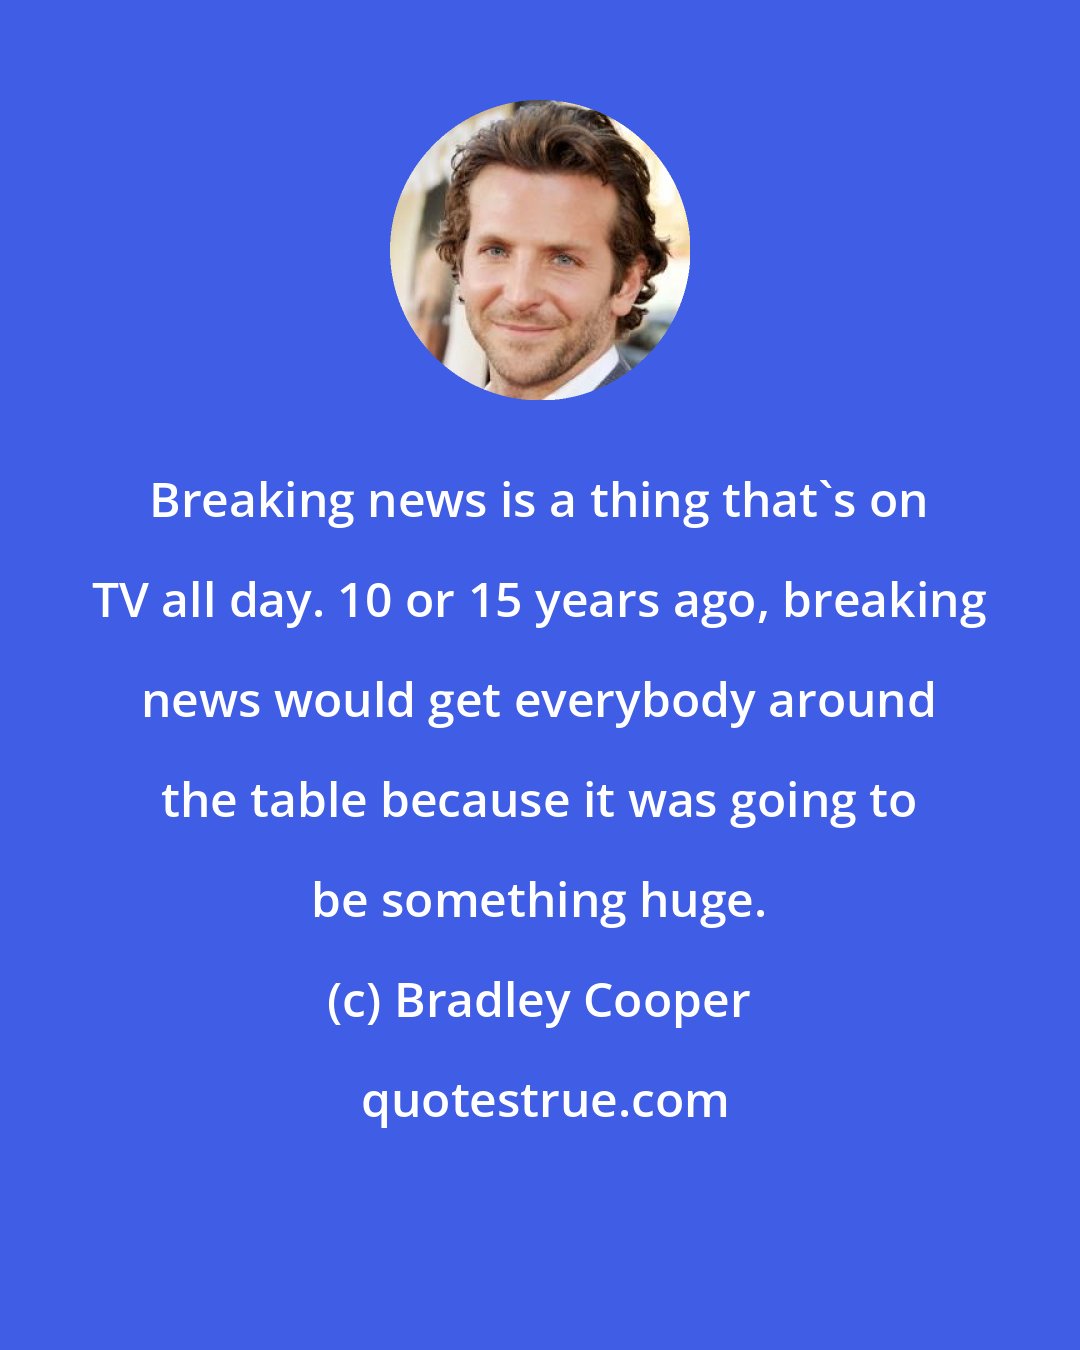 Bradley Cooper: Breaking news is a thing that's on TV all day. 10 or 15 years ago, breaking news would get everybody around the table because it was going to be something huge.